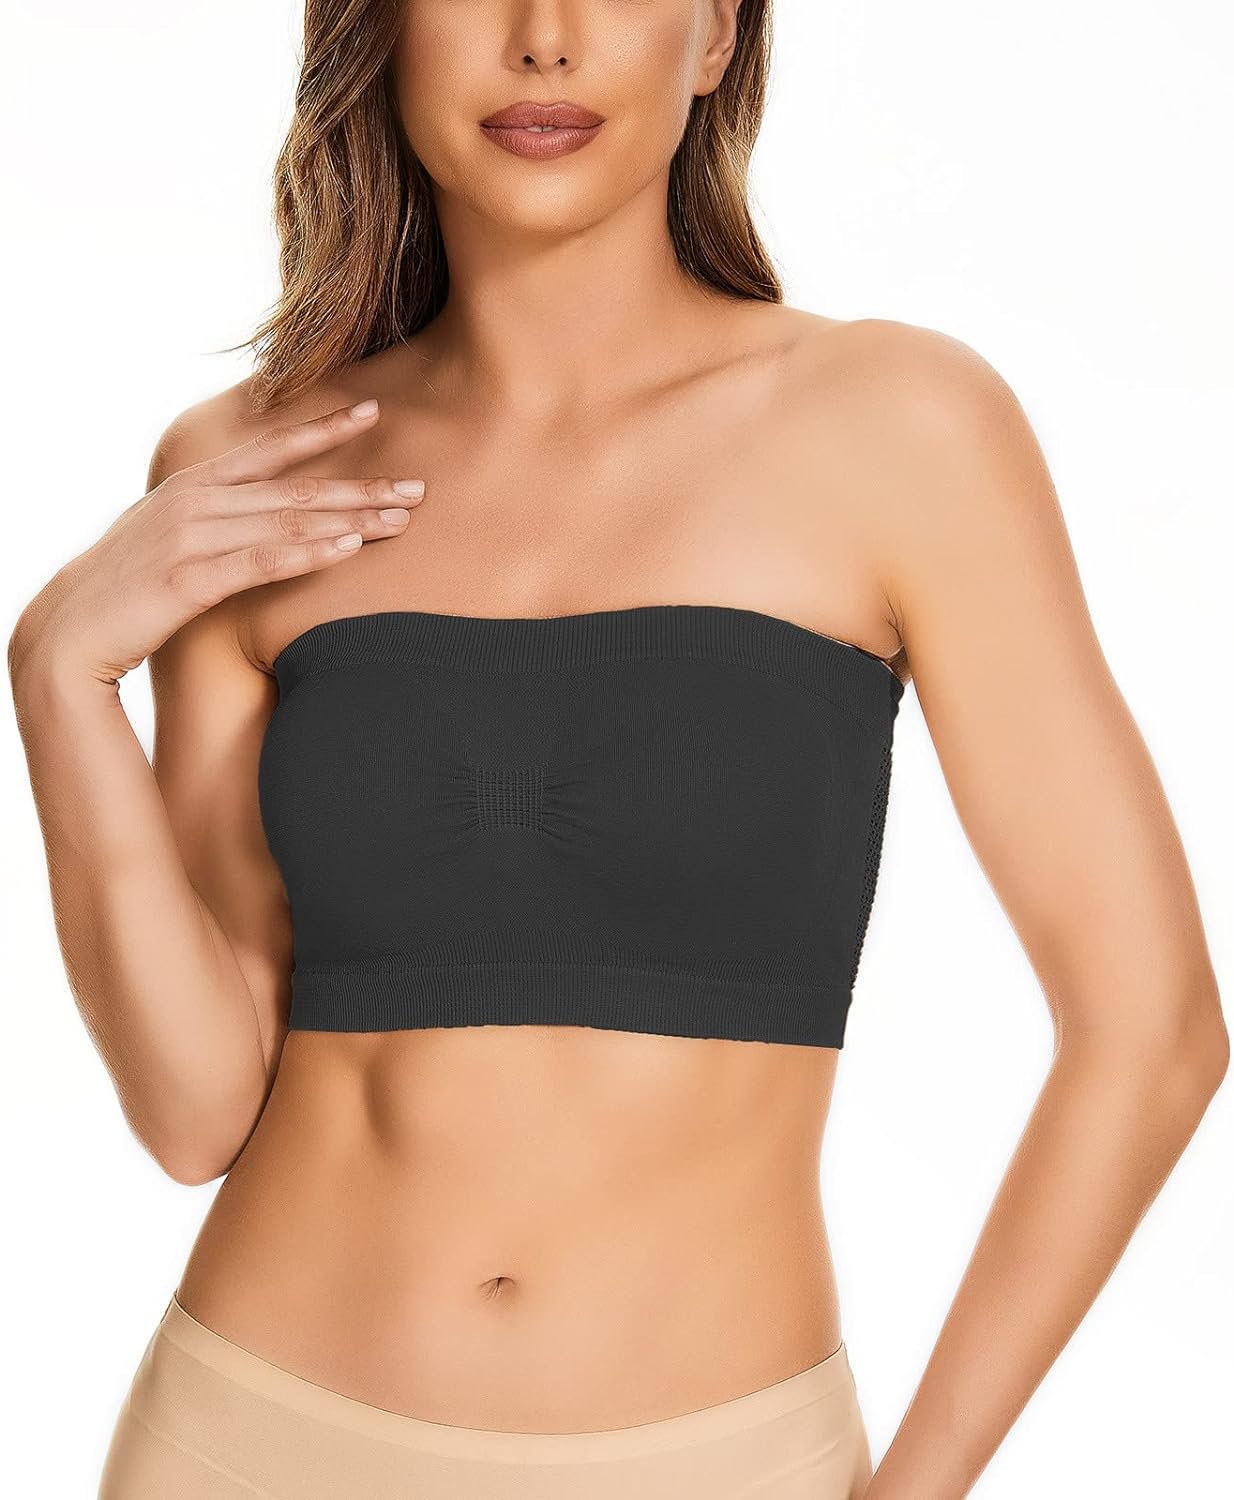 Womens Non Padded Bandeau Bra Wire Strapless Convertible Bralettes Basic Layer Top Bra Knit Tube Top